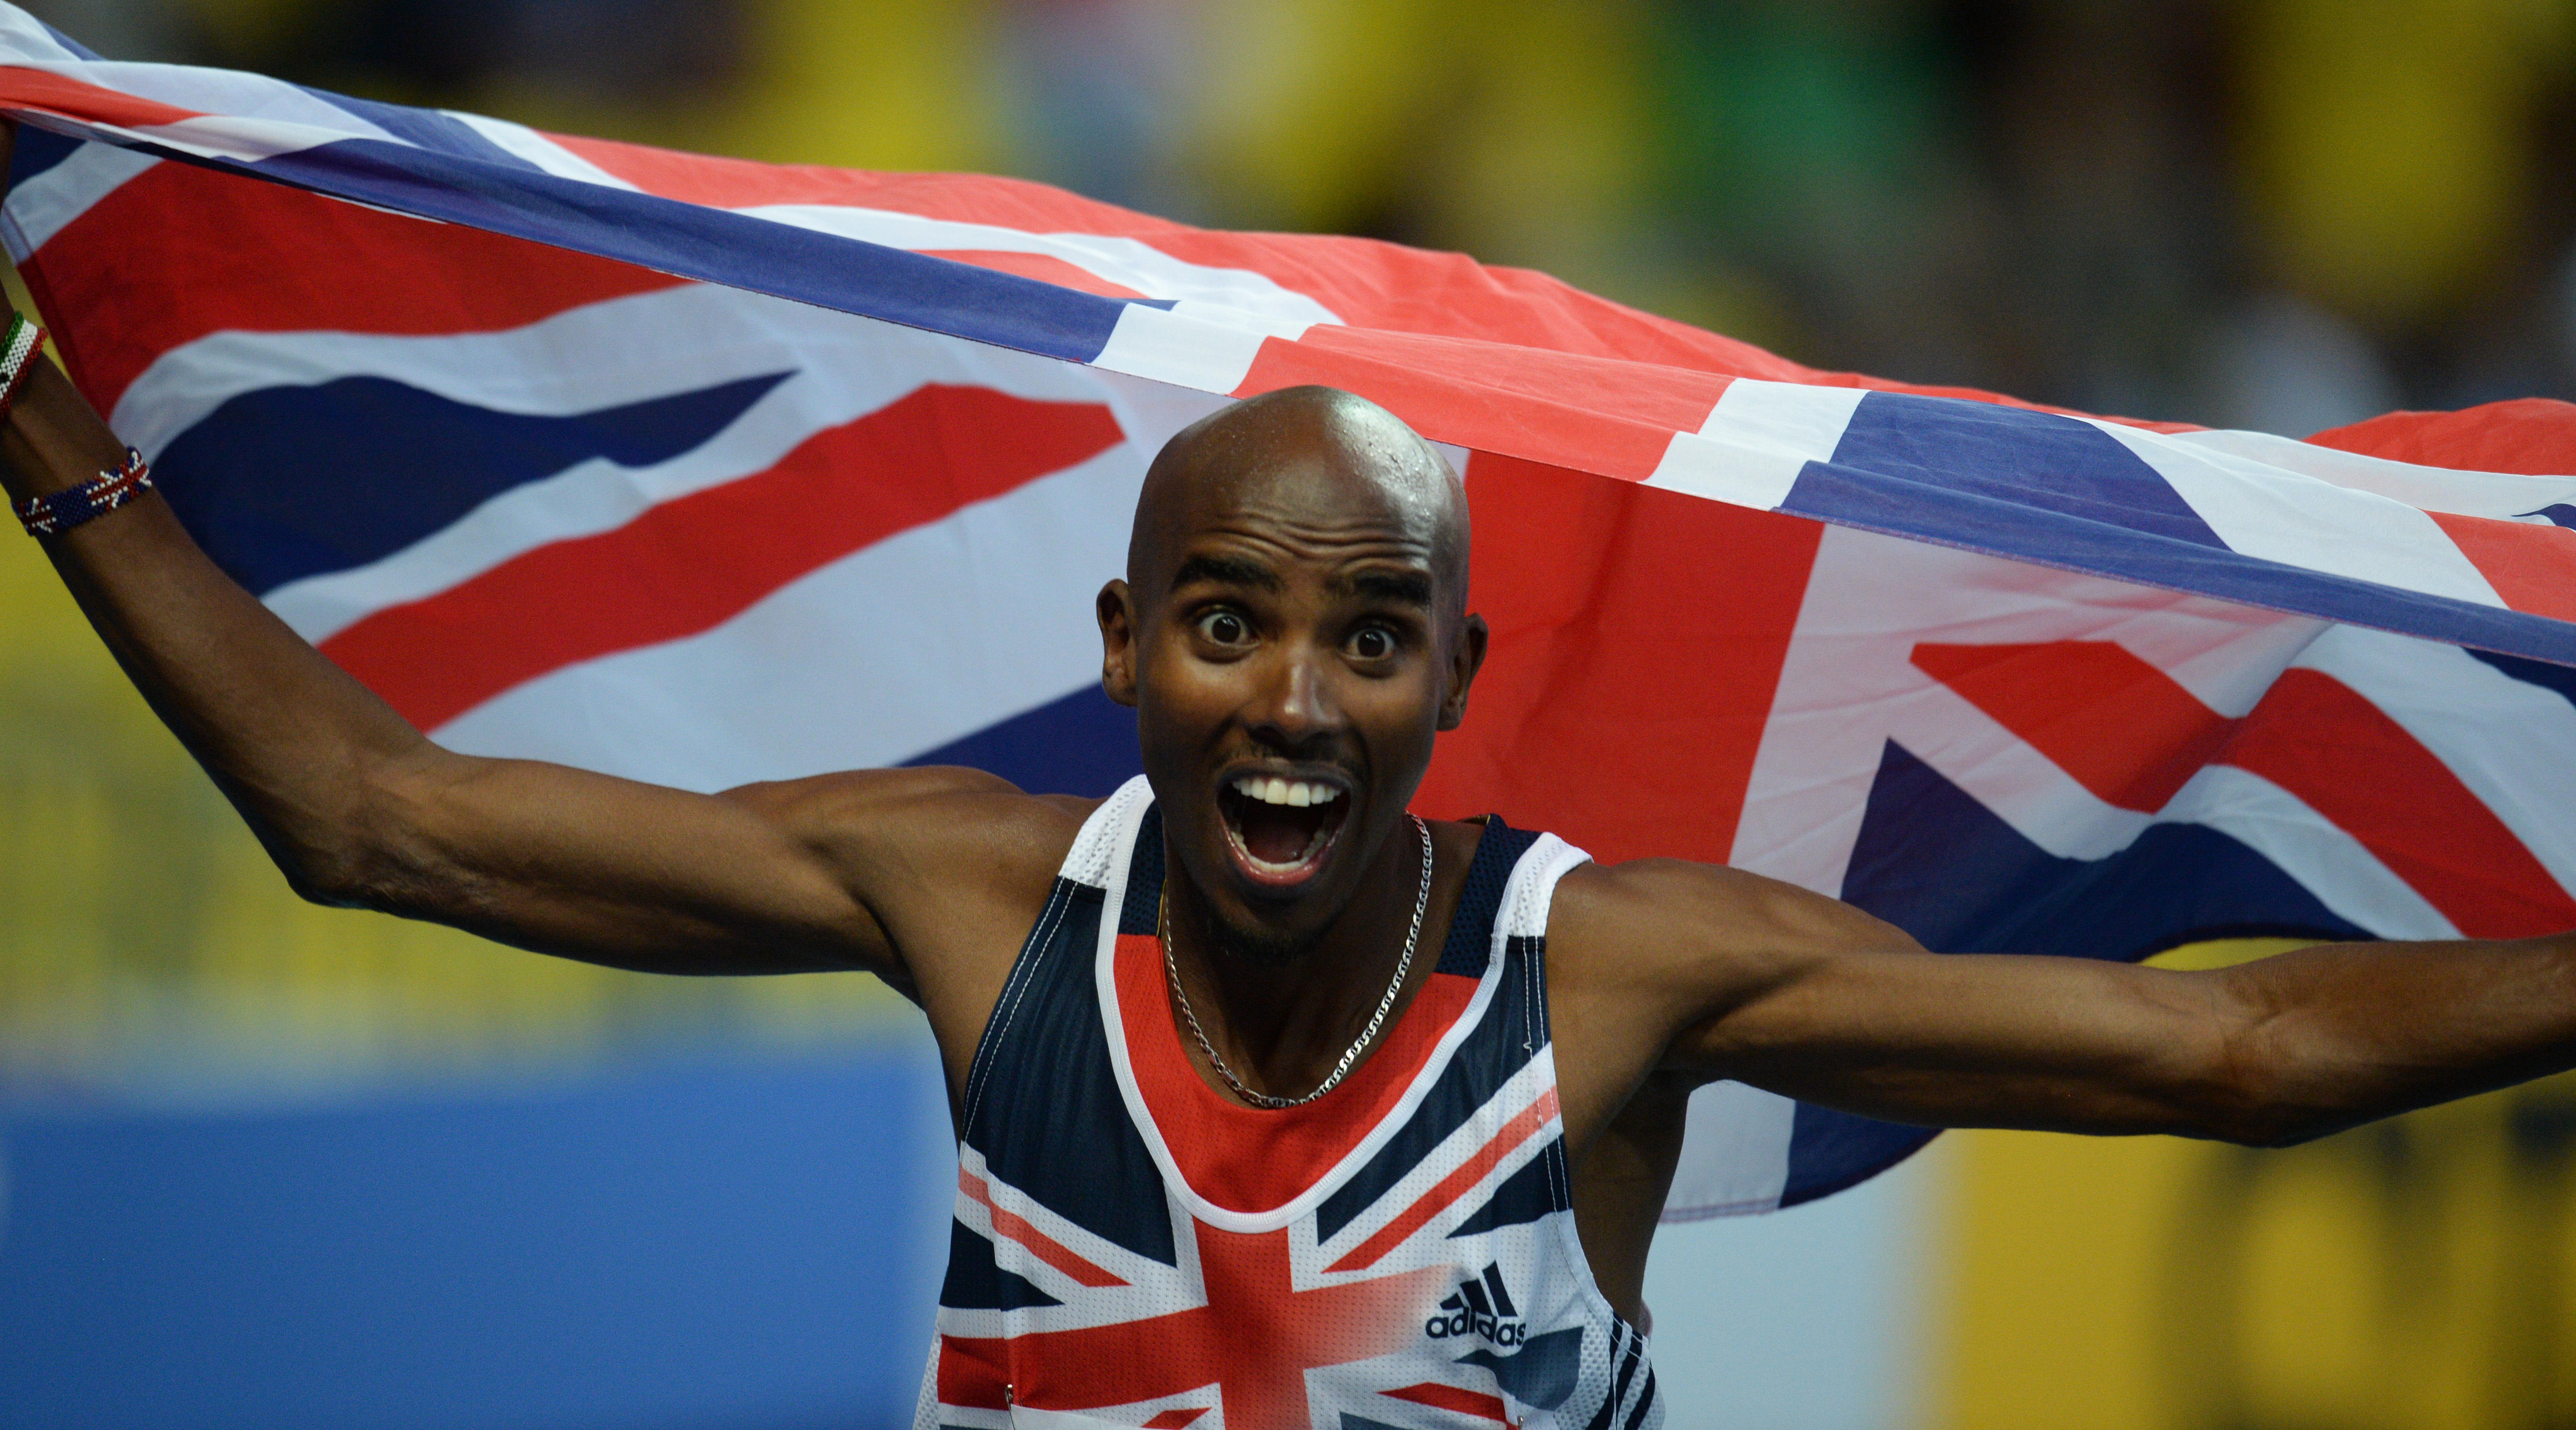 Mo Farah of Great Britain celebrates after winning the Men's 5000m Final at the 14th IAAF World Championships in Athletics at Luzhniki Stadium in Moscow, Russia, 16 August 2013